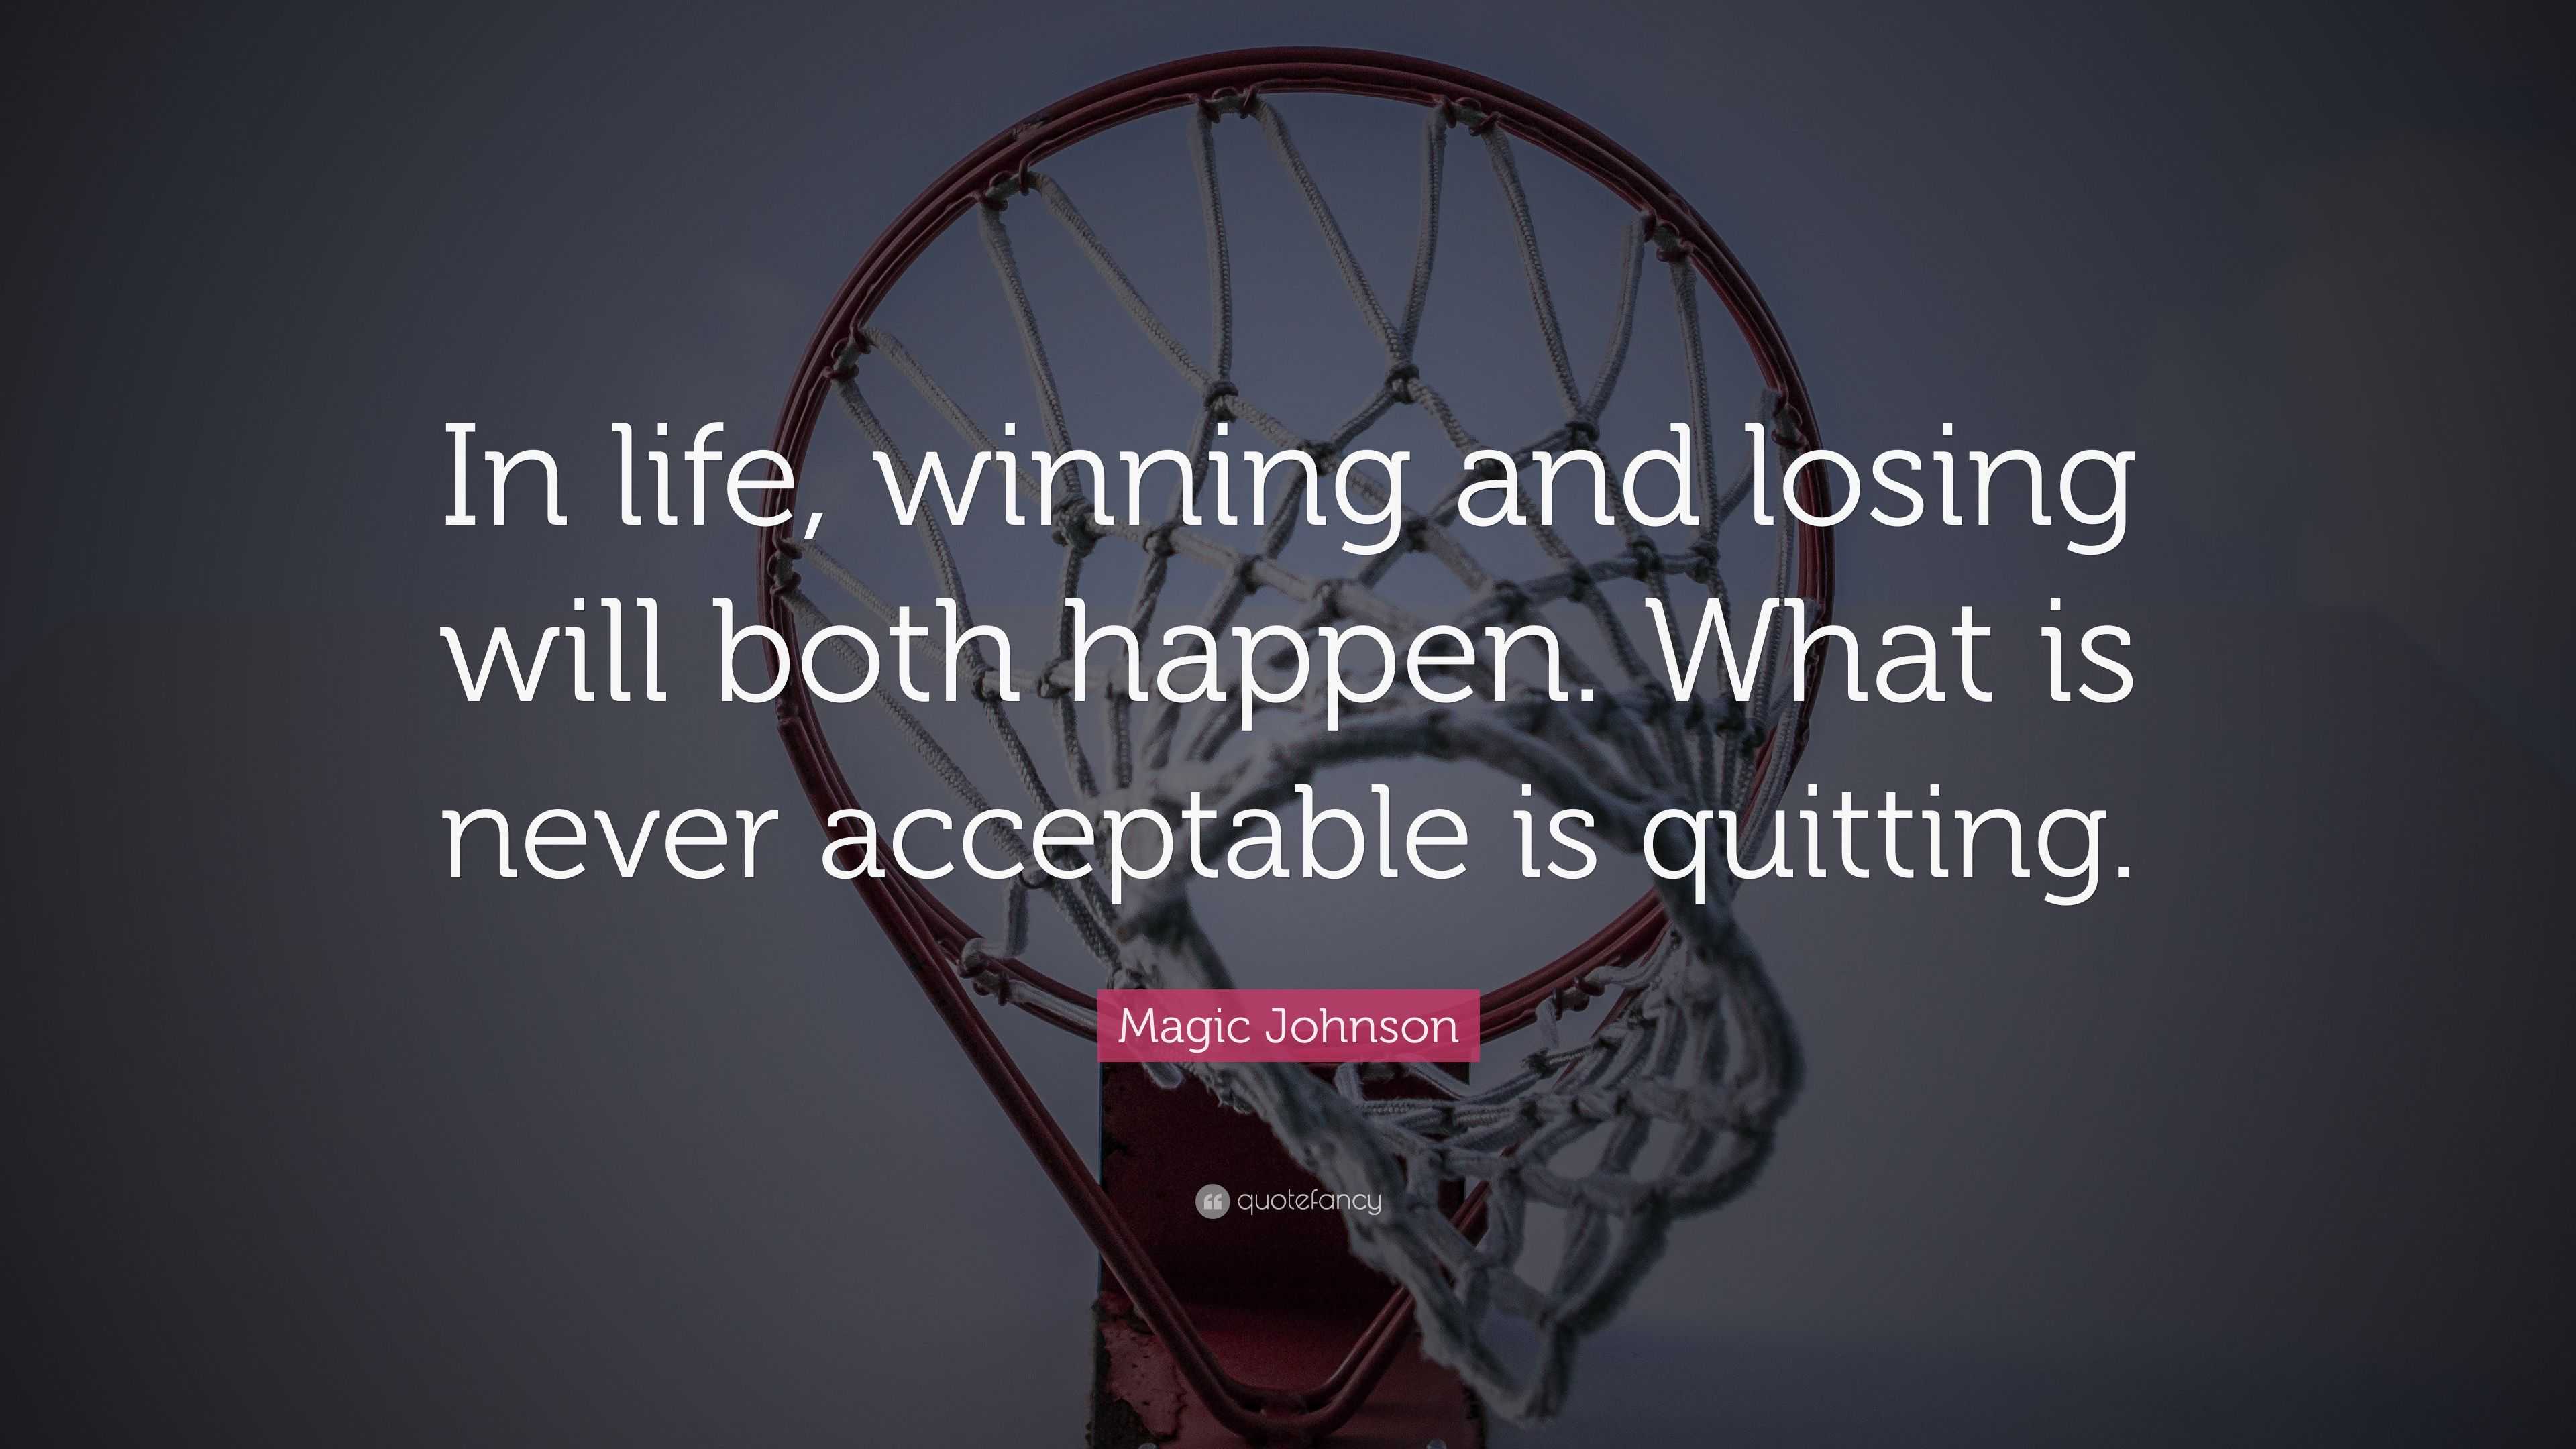 Magic Johnson Quote: “In life, winning and losing will both happen ...